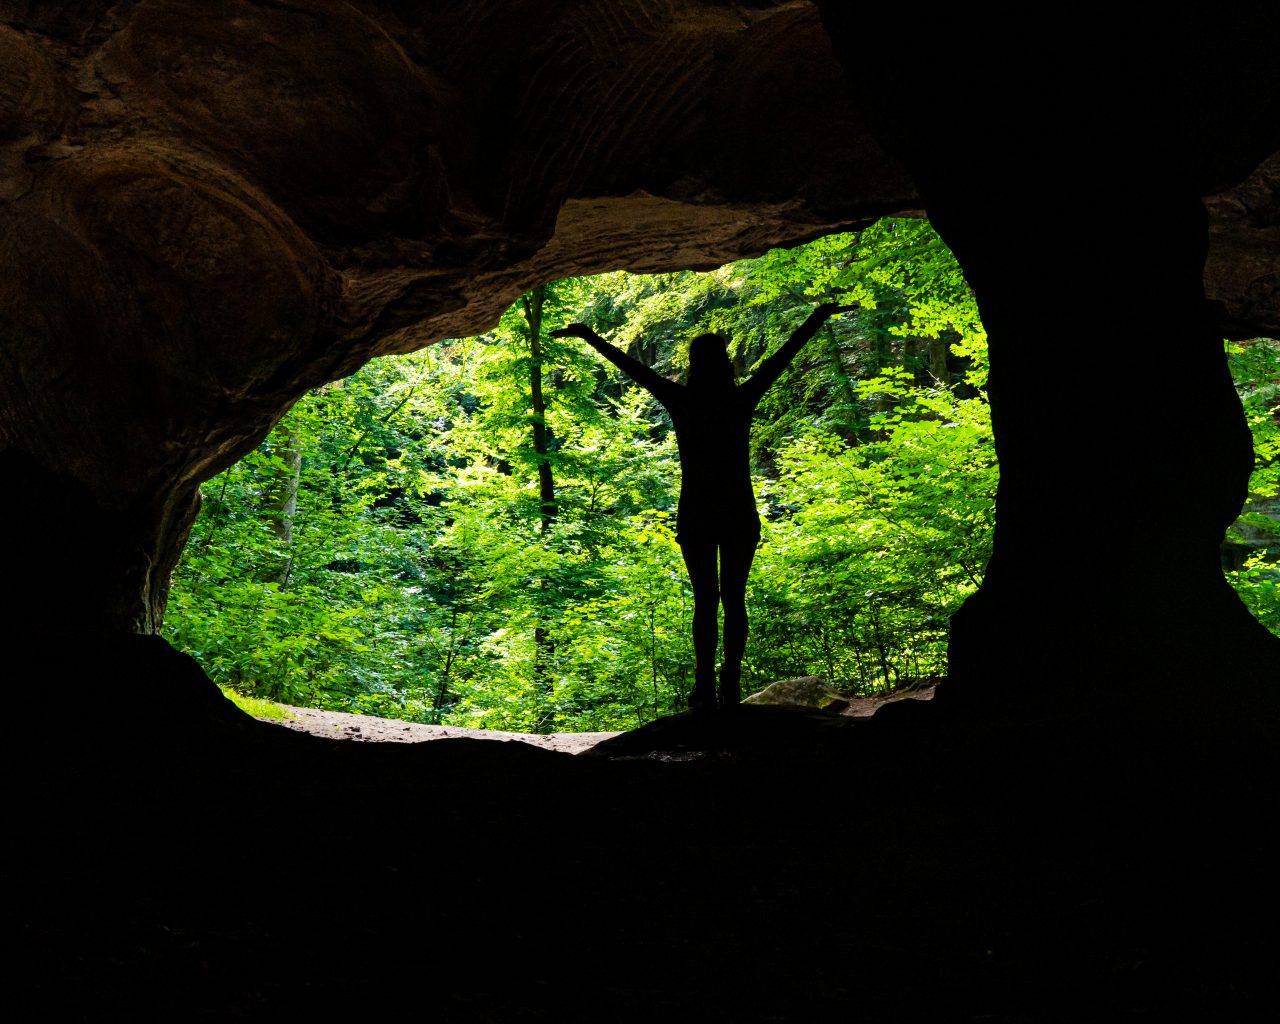 Jessica-silhouet-in-grot-Hohllay-cave-Luxemburg